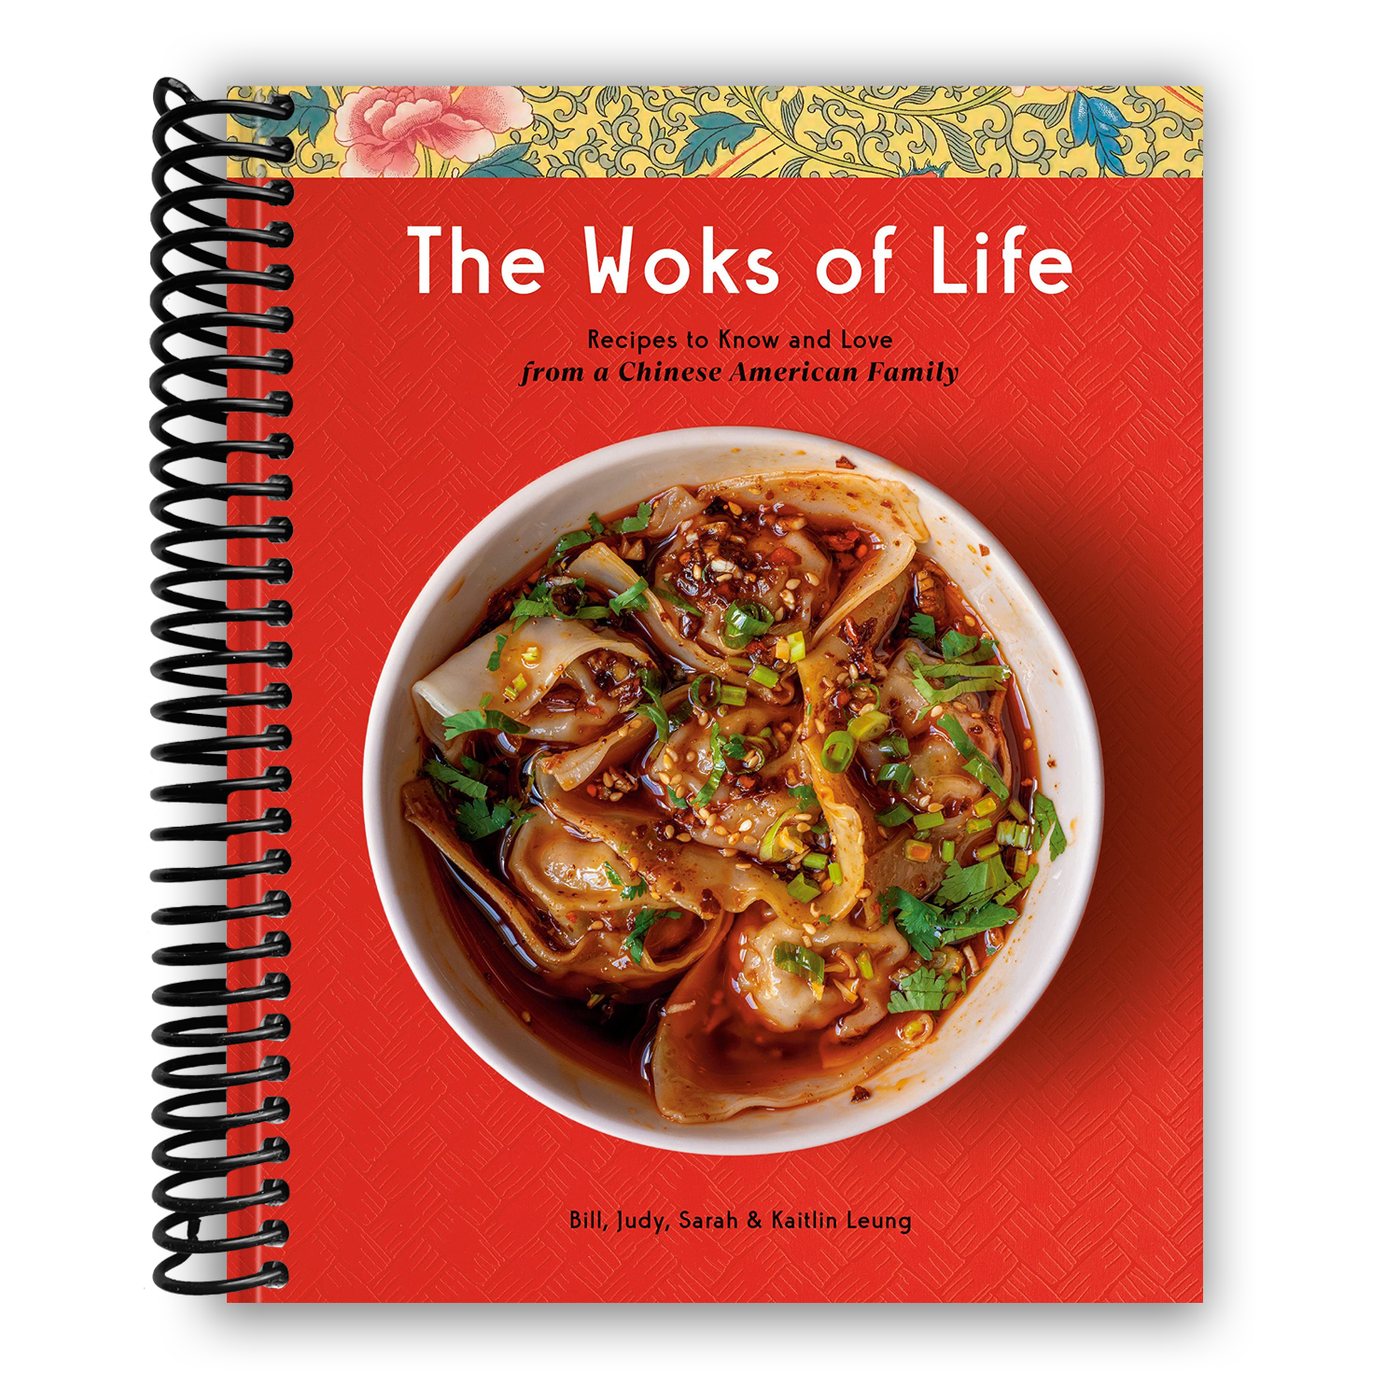 The Woks of Life: Recipes to Know and Love from a Chinese American Family (Spiral Bound)